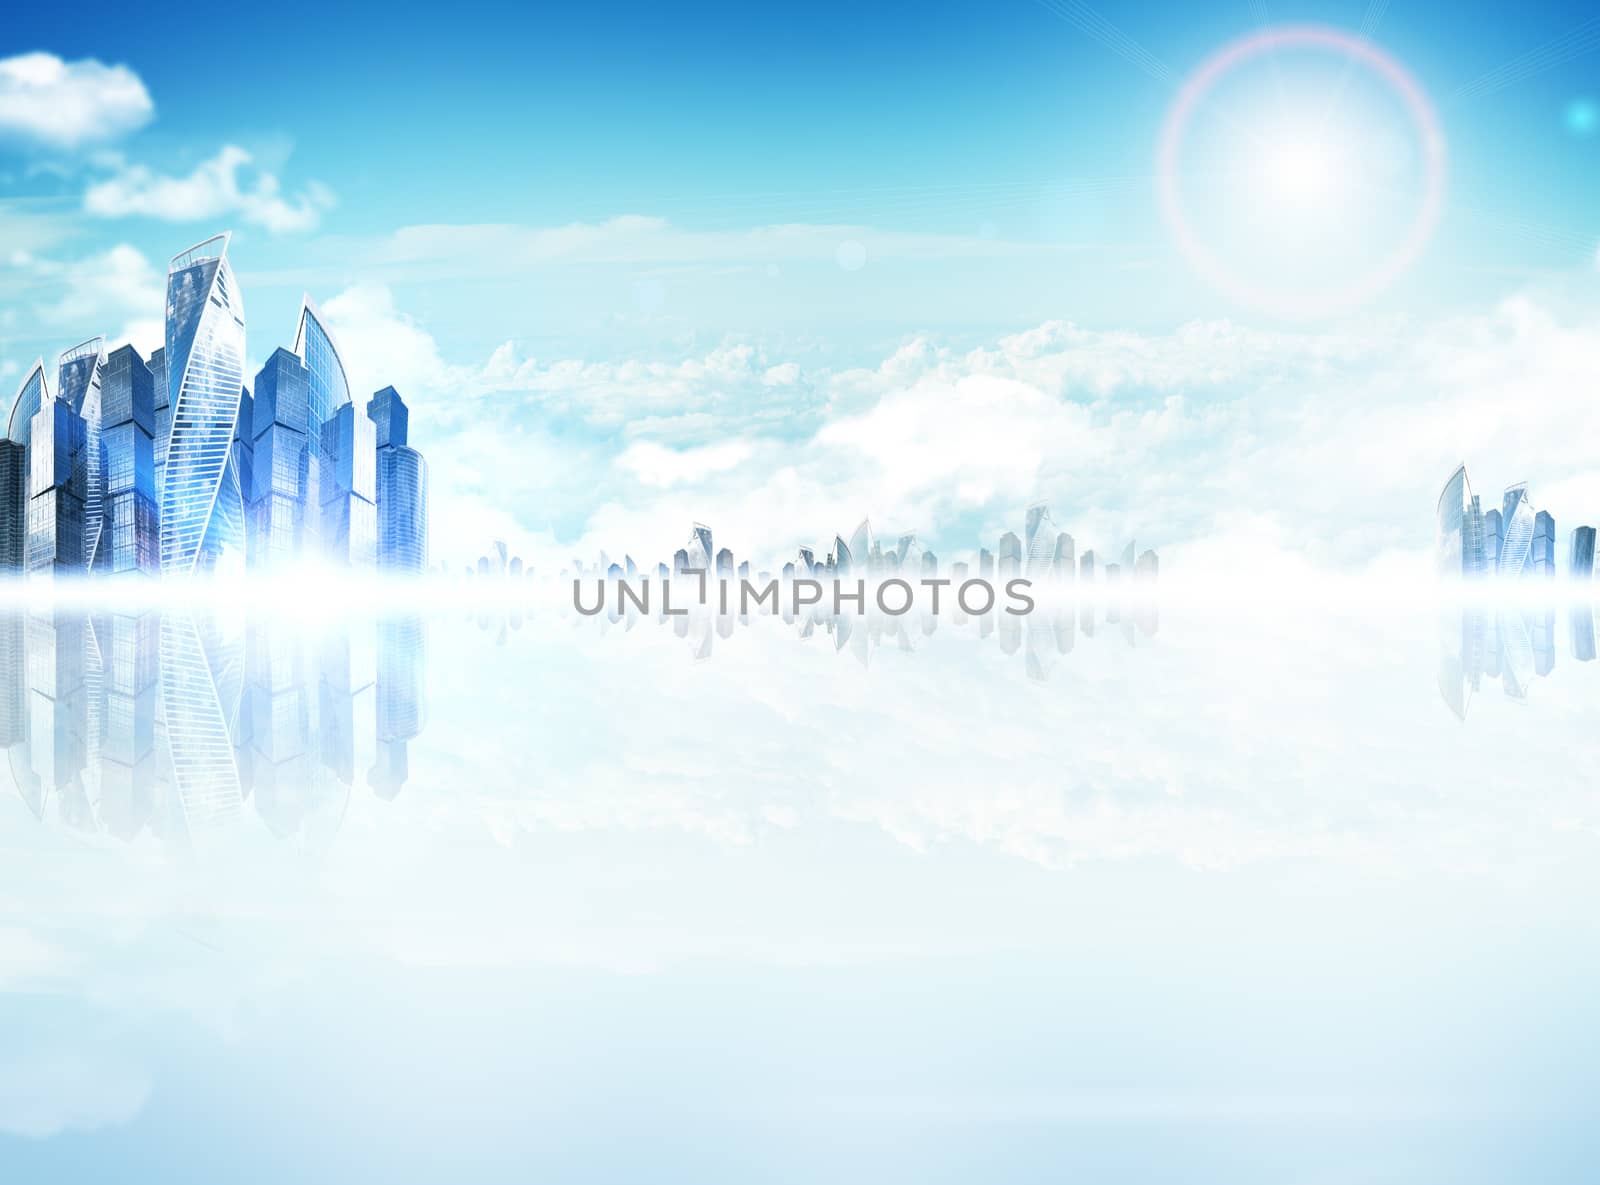 City with reflection and blue sky with clouds and skyline